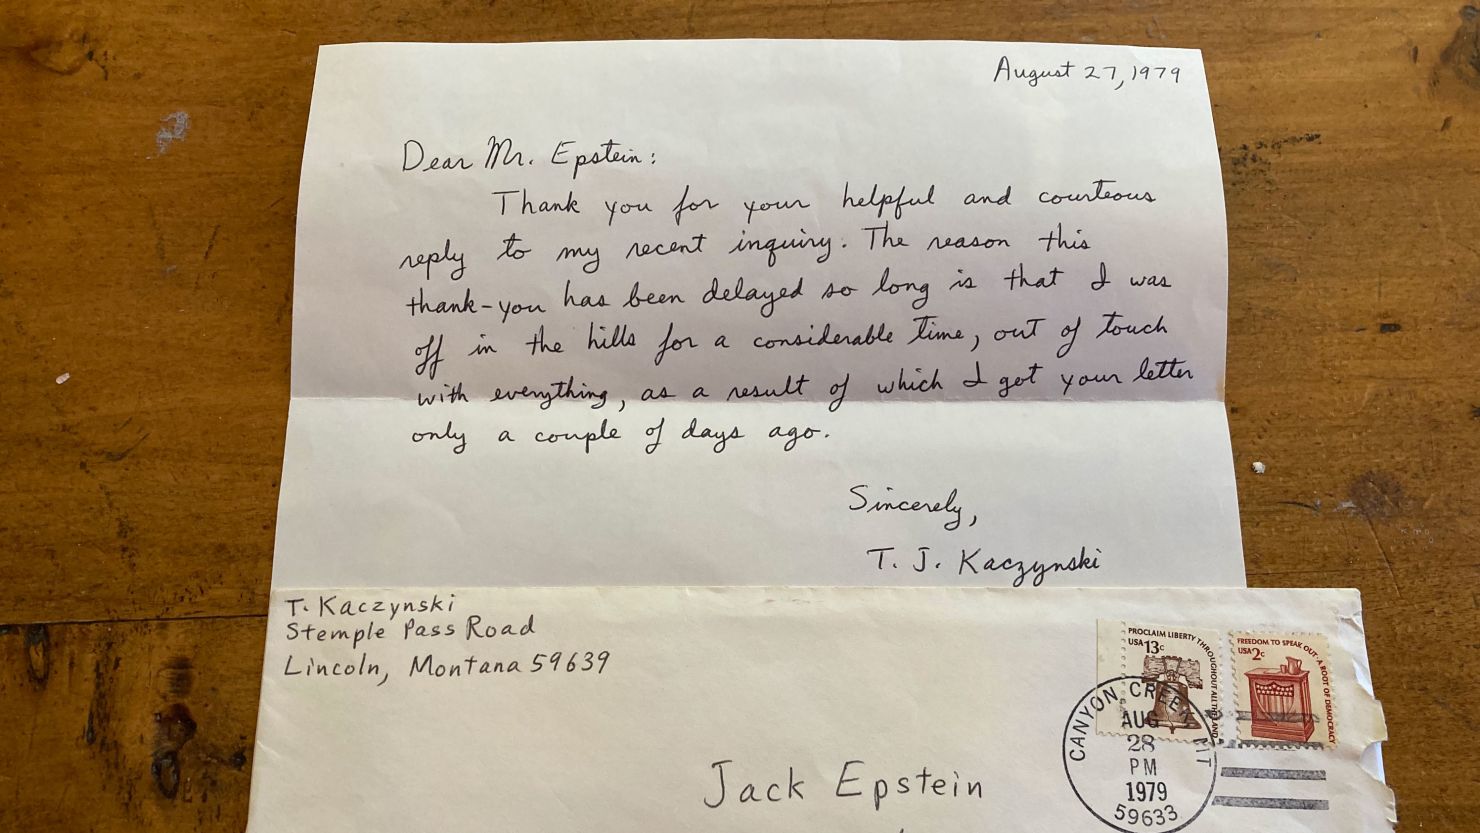 Epstein discovered the letters last month while he was cleaning out his attic. 